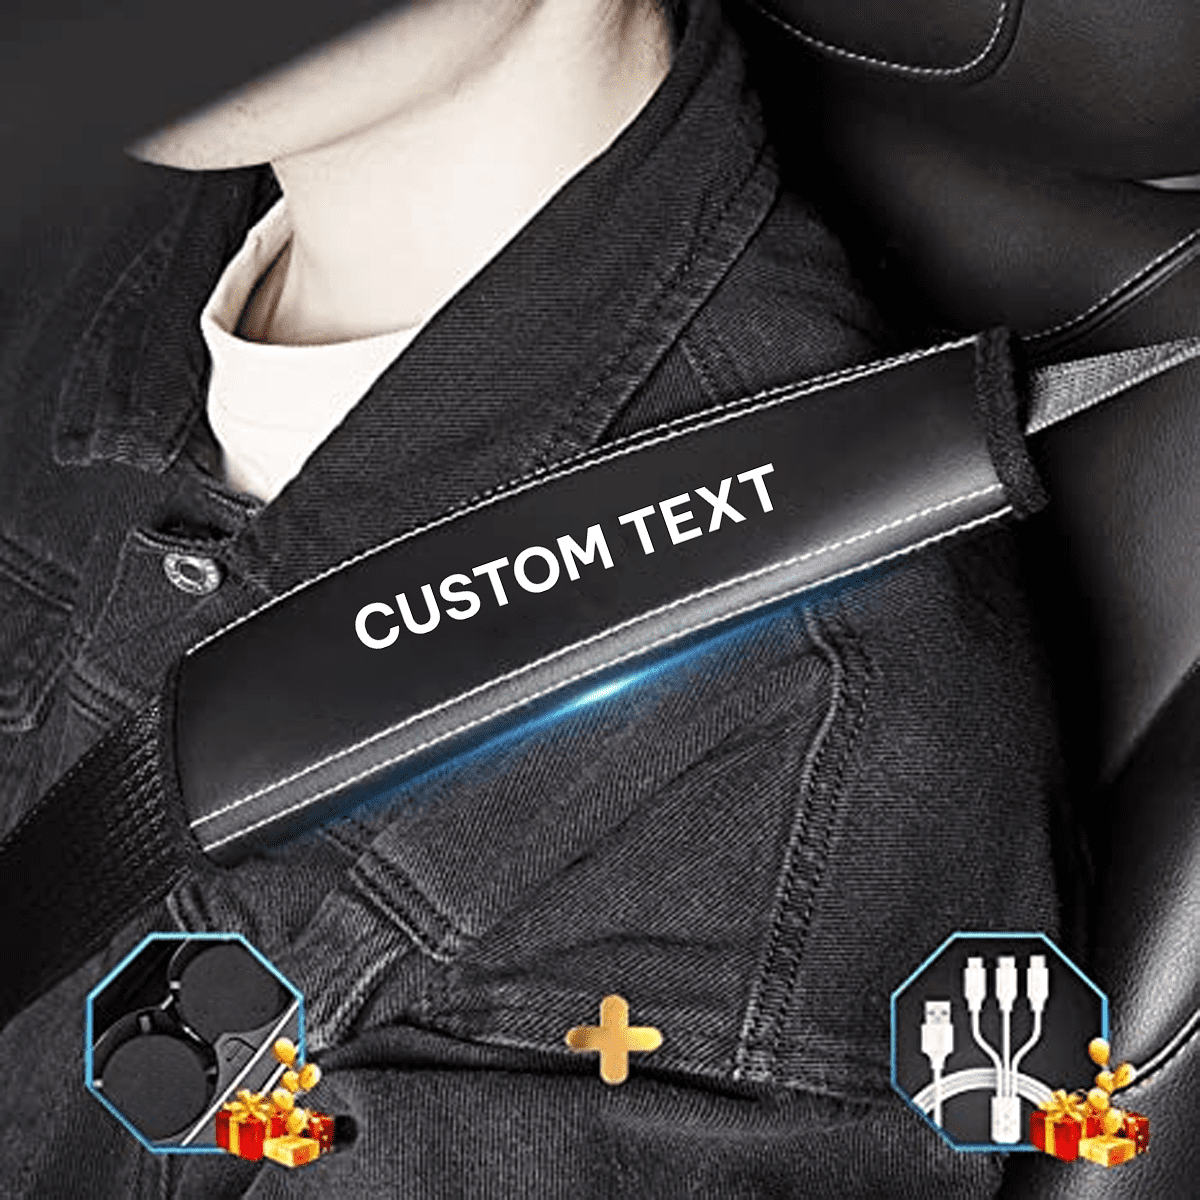 Custom Text and Logo Seat Belt Covers, Fit with Daimler, Microfiber Leather Seat Belt Shoulder Pads for More Comfortable Driving, Set of 2pcs - Delicate Leather